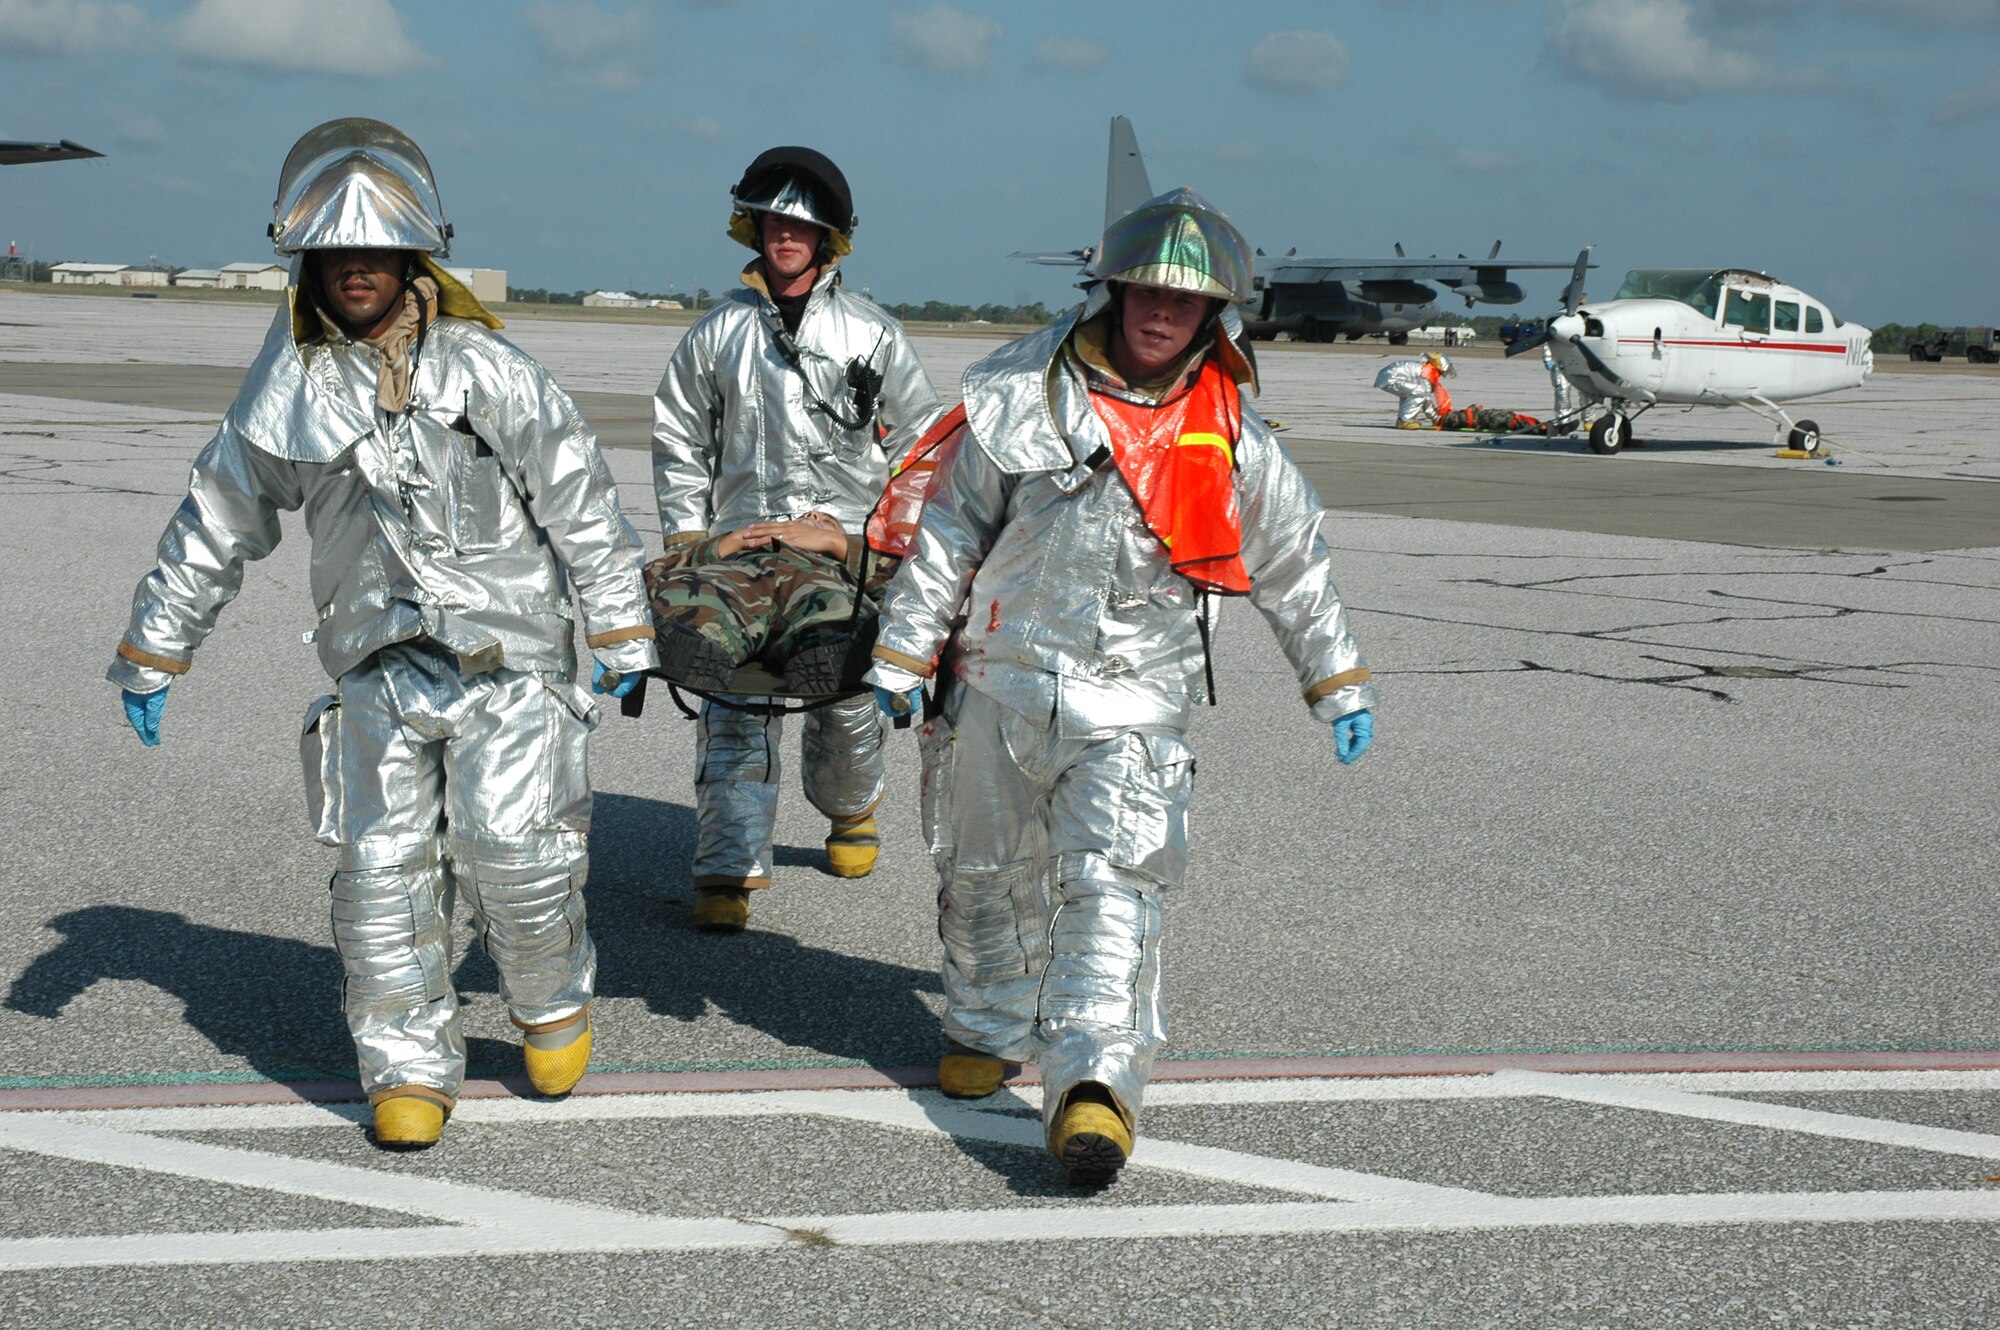 EGLIN AIR FORCE BASE, Fla. -- Eglin firemen carry a victim to the medical staging area during the major accident readiness exercise April 3 after responding to a simulated F-16 crash. The MARE was in preparation for the 2007 Eglin Air Show April 14-15. There were two other incidents that tested Eglin Airmen's emergency response capabilities: a vehicle borne chemical weapon attack and a bomb threat on a C-130 aircraft. (U.S. Air Force Photo by Staff Sgt. Mike Meares)